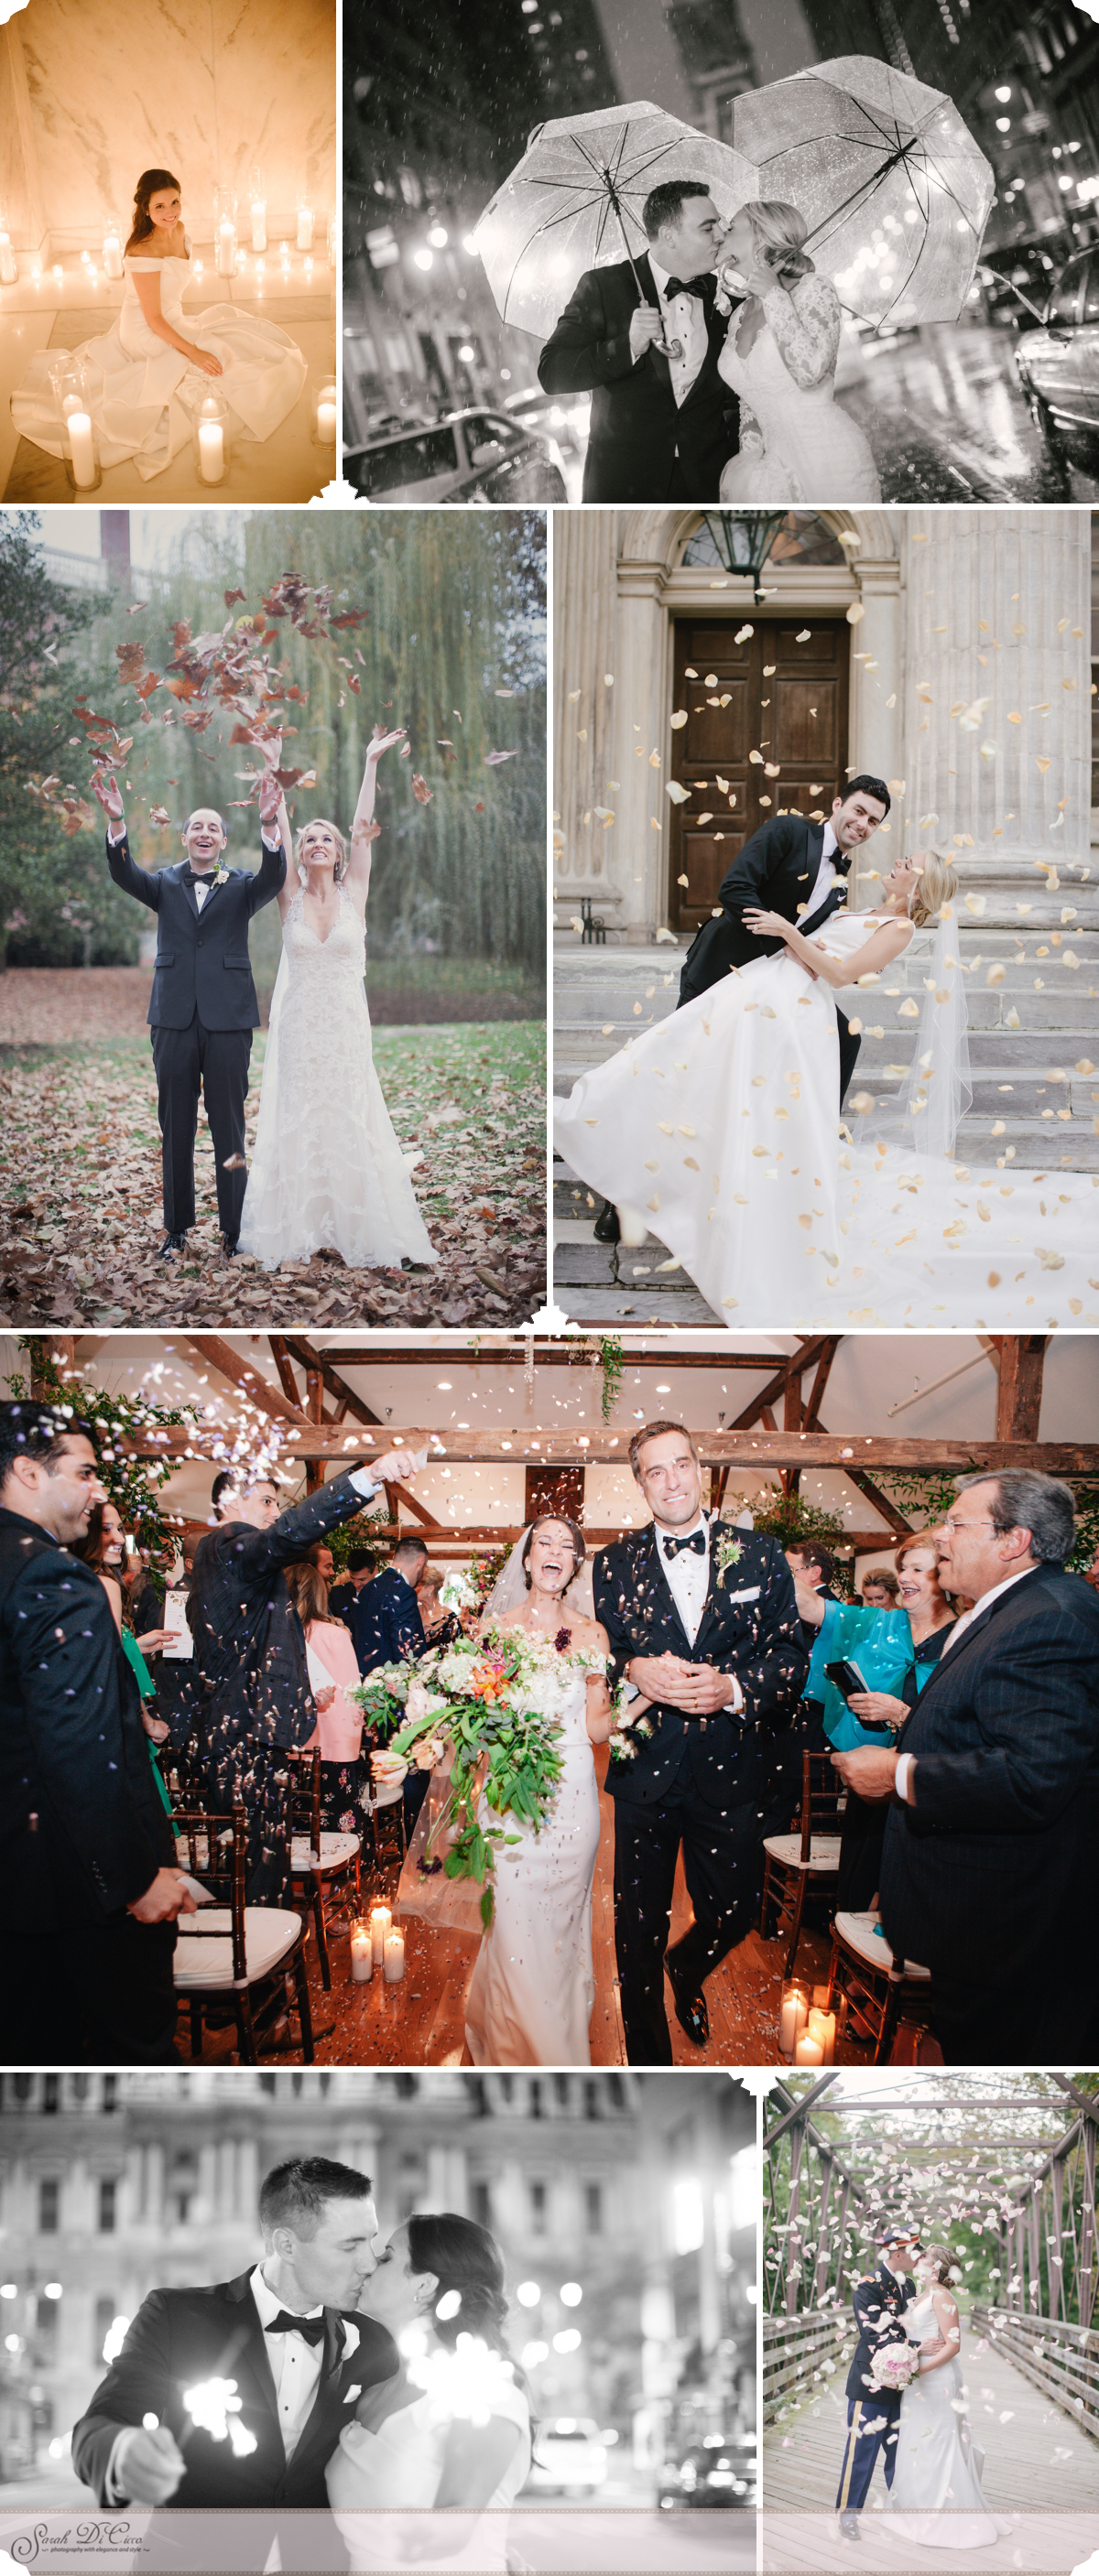 Petals and Sparkles Sarah DiCicco Photography - Year in Review 2018